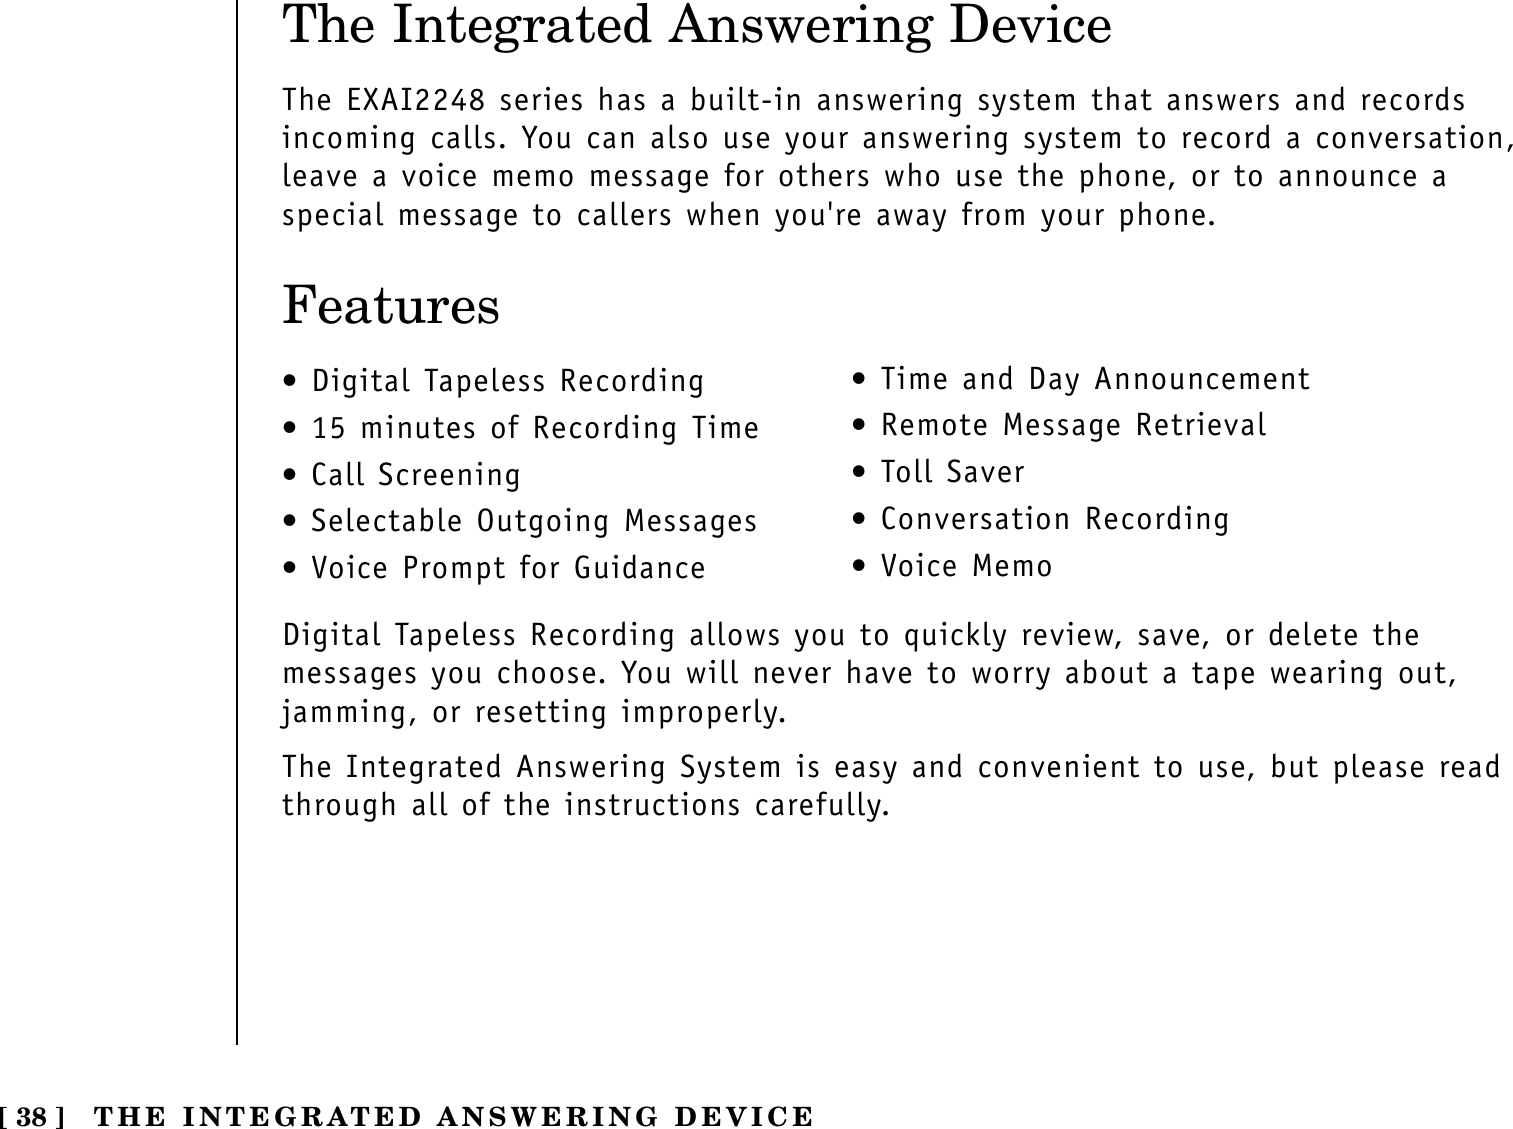 The Integrated Answering DeviceThe EXAI2248 series has a built-in answering system that answers and recordsincoming calls. You can also use your answering system to record a conversation,leave a voice memo message for others who use the phone, or to announce aspecial message to callers when you&apos;re away from your phone.Features•Digital Tapeless Recording•15 minutes of Recording Time•Call Screening•Selectable Outgoing Messages•Voice Prompt for Guidance•Time and Day Announcement•Remote Message Retrieval•Toll Saver•Conversation Recording•Voice MemoDigital Tapeless Recording allows you to quickly review, save, or delete themessages you choose. You will never have to worry about a tape wearing out,jamming, or resetting improperly.The Integrated Answering System is easy and convenient to use, but please readthrough all of the instructions carefully.[ 38 ] THE INTEGRATED ANSWERING DEVICE